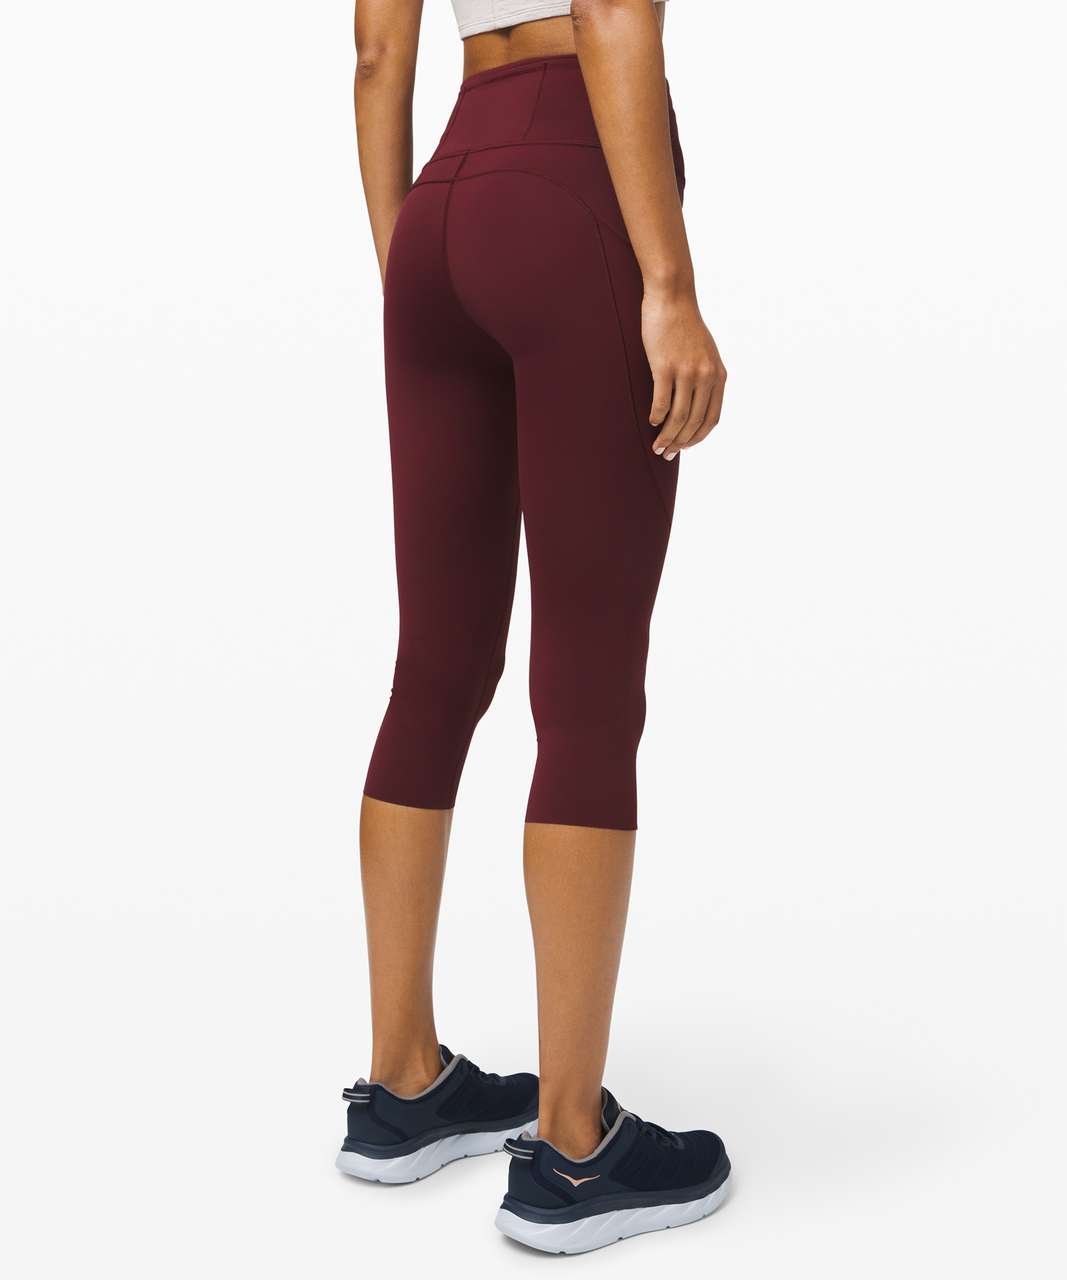 Lululemon Fast and Free High-Rise Crop II *Non-Reflective Nulux 